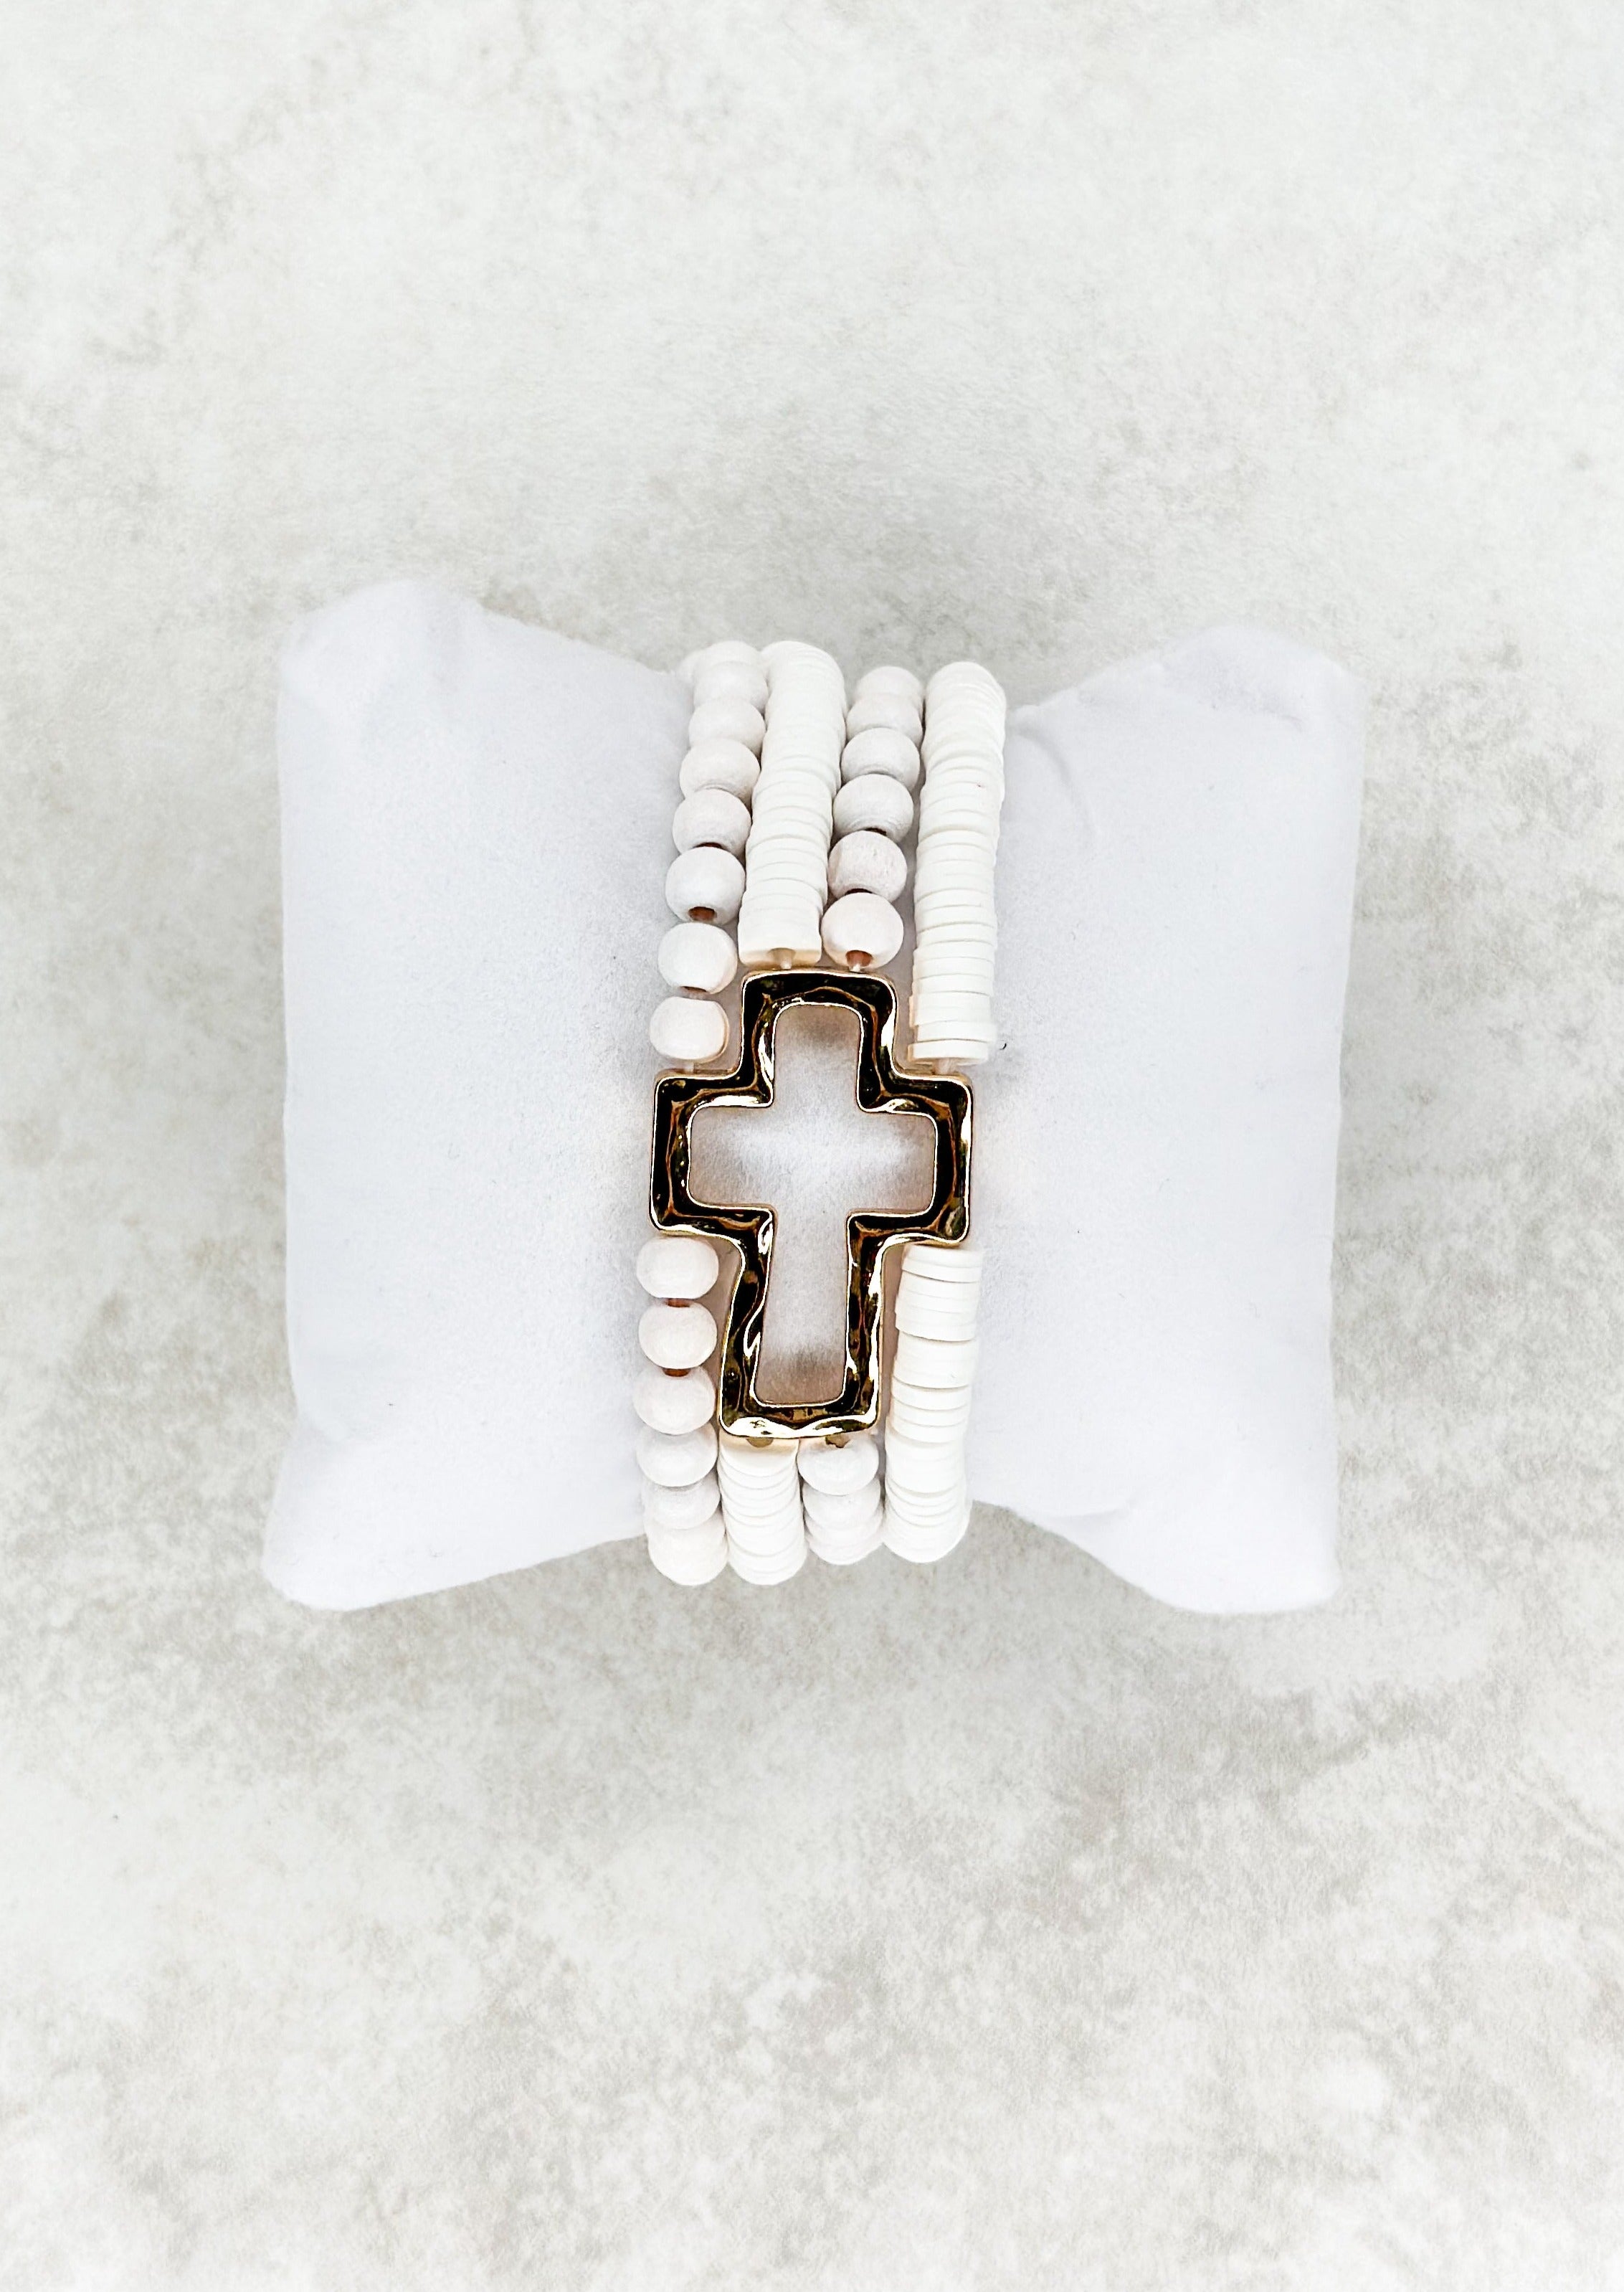 Four strand white beaded stretch bracelet attached to open gold cross.